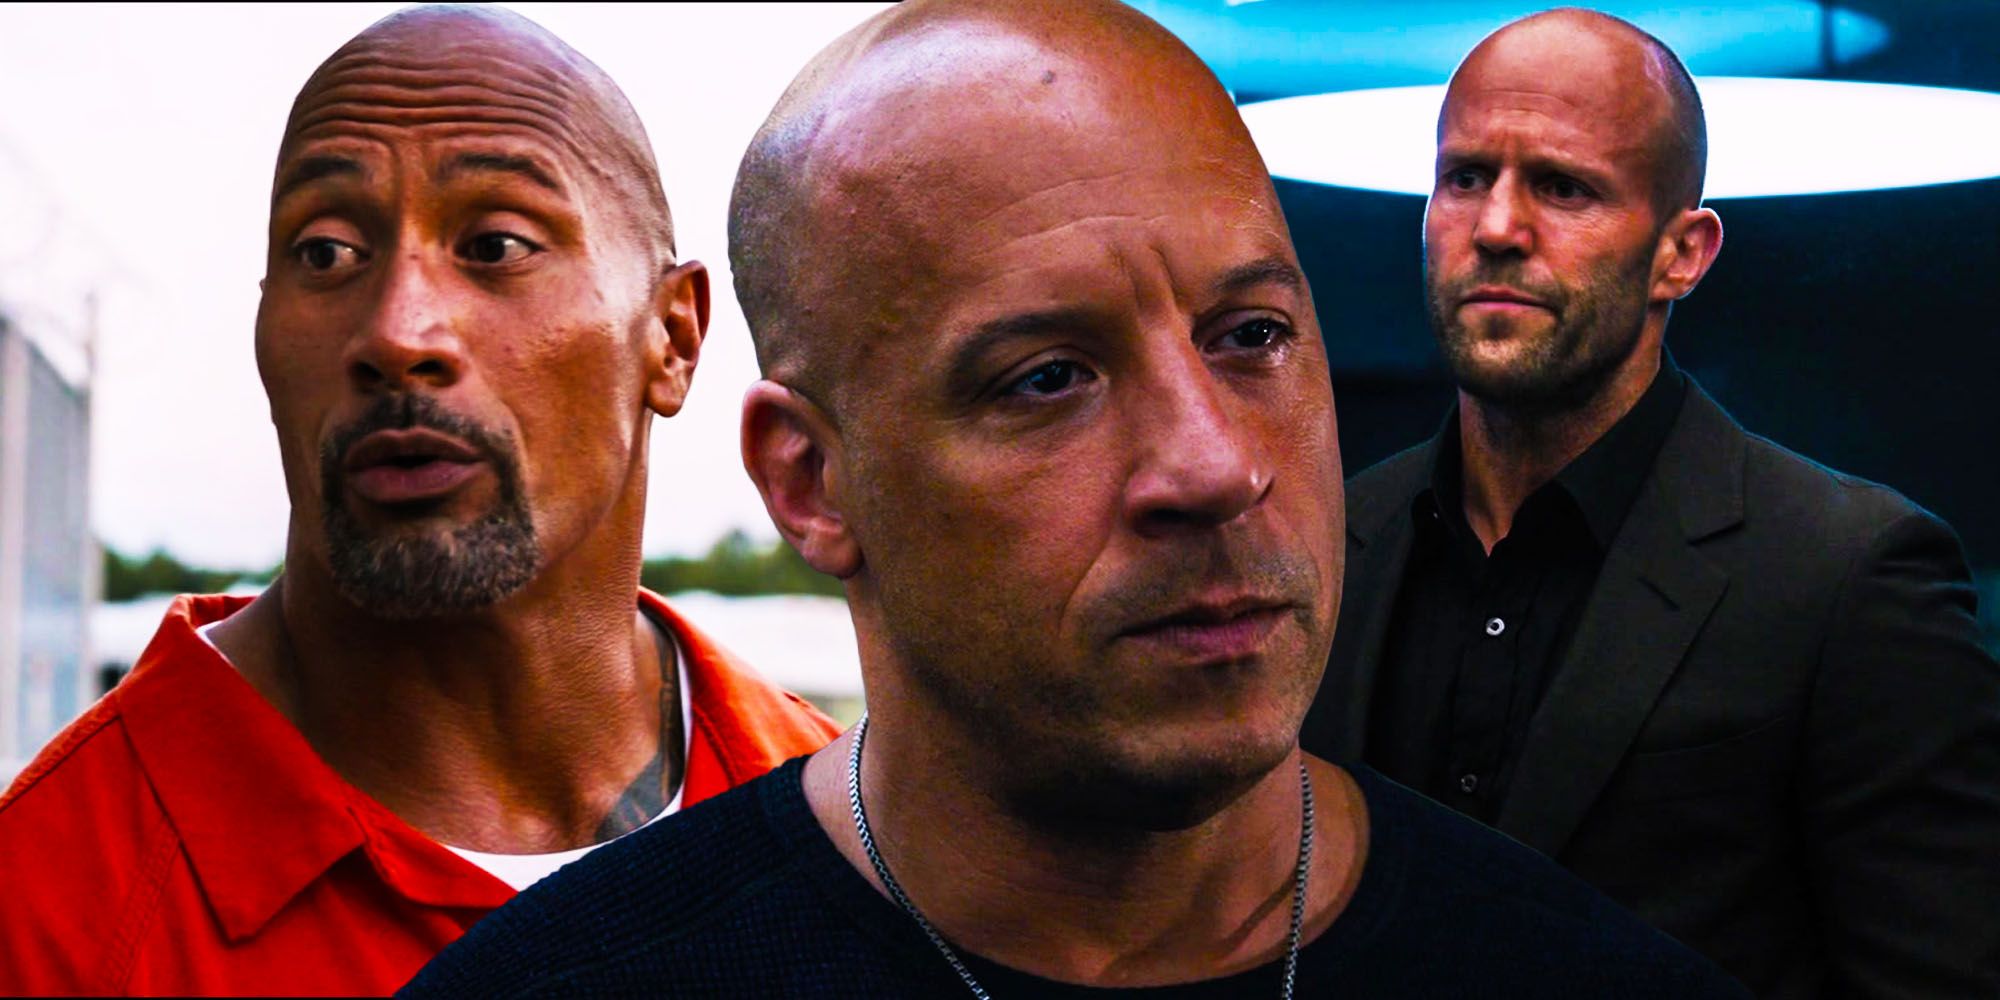 The Fast & Furious Cast's Refusal To Lose Fights Is An Issue